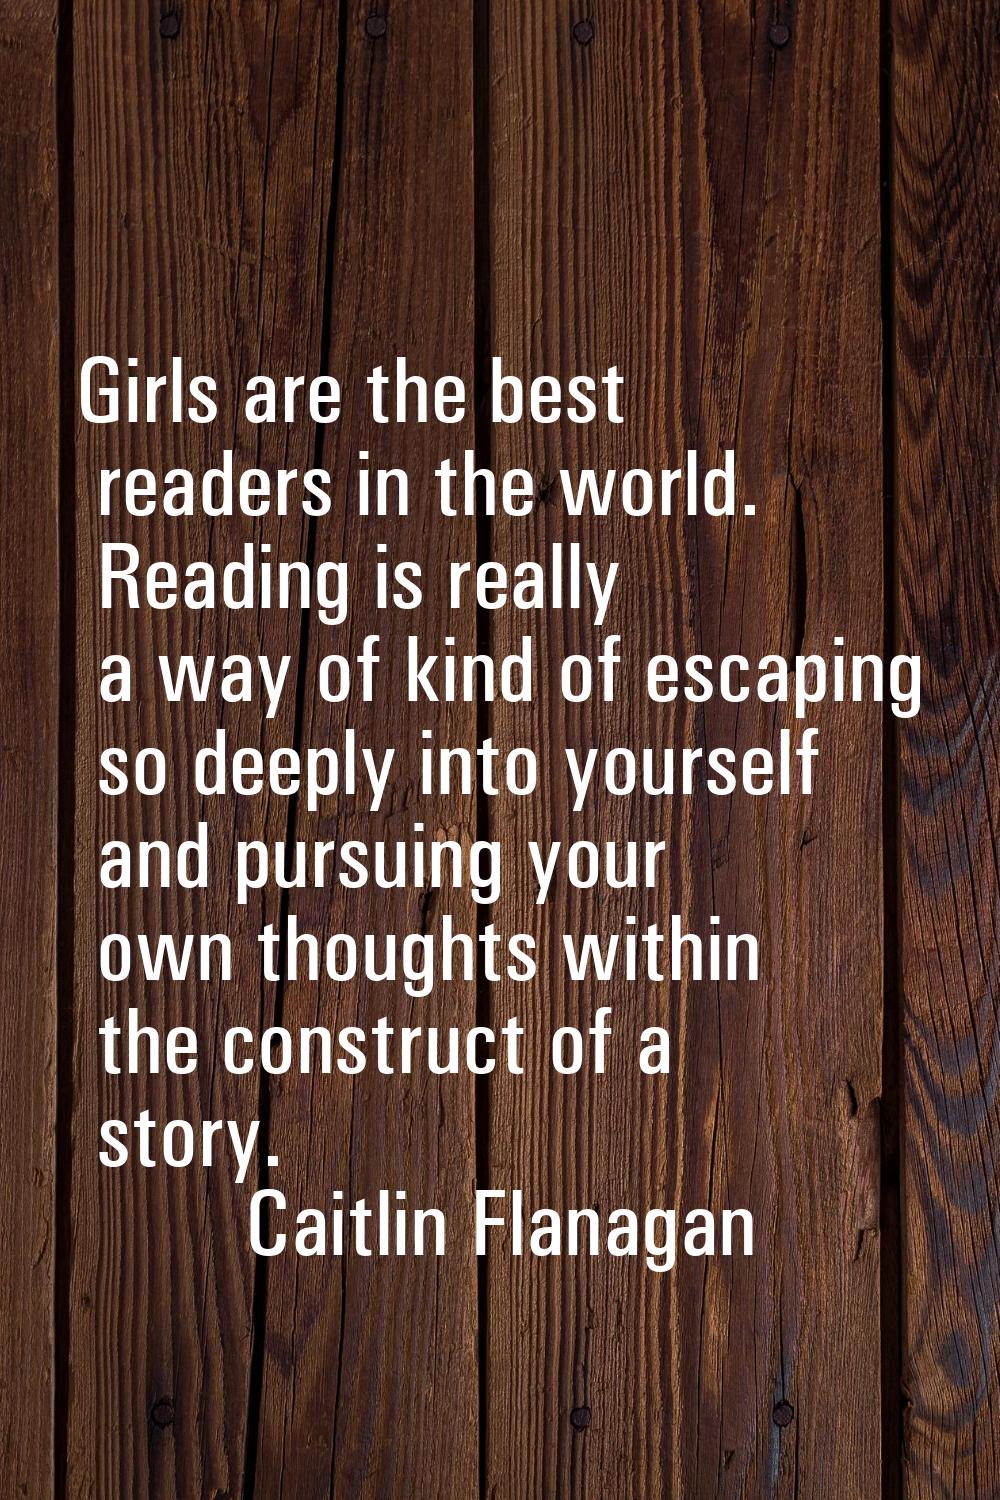 Girls are the best readers in the world. Reading is really a way of kind of escaping so deeply into